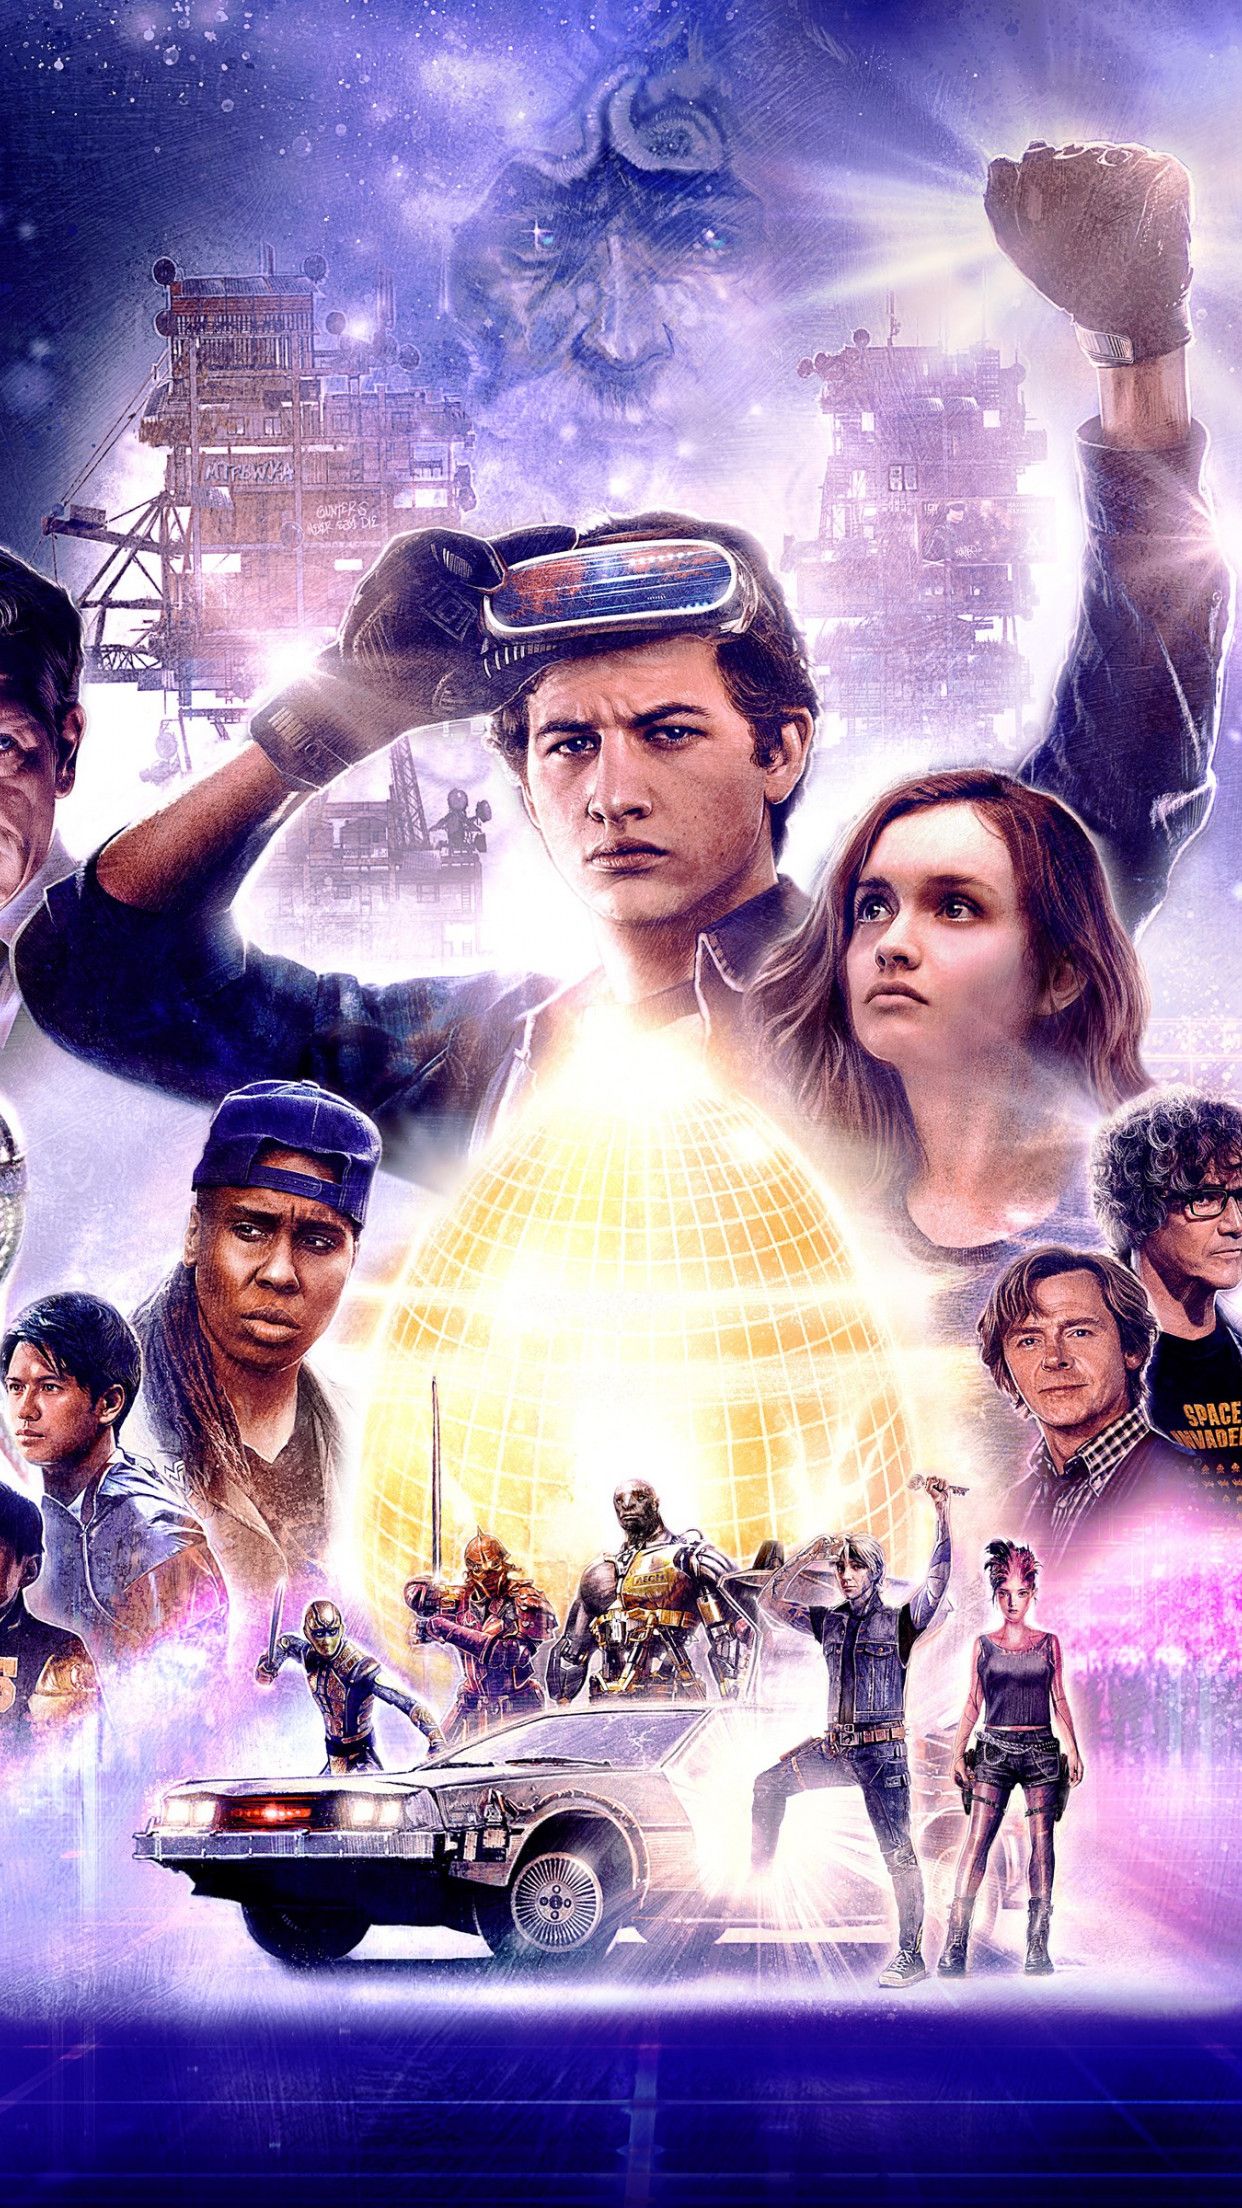 Download wallpaper: Ready Player One poster 1242x2208